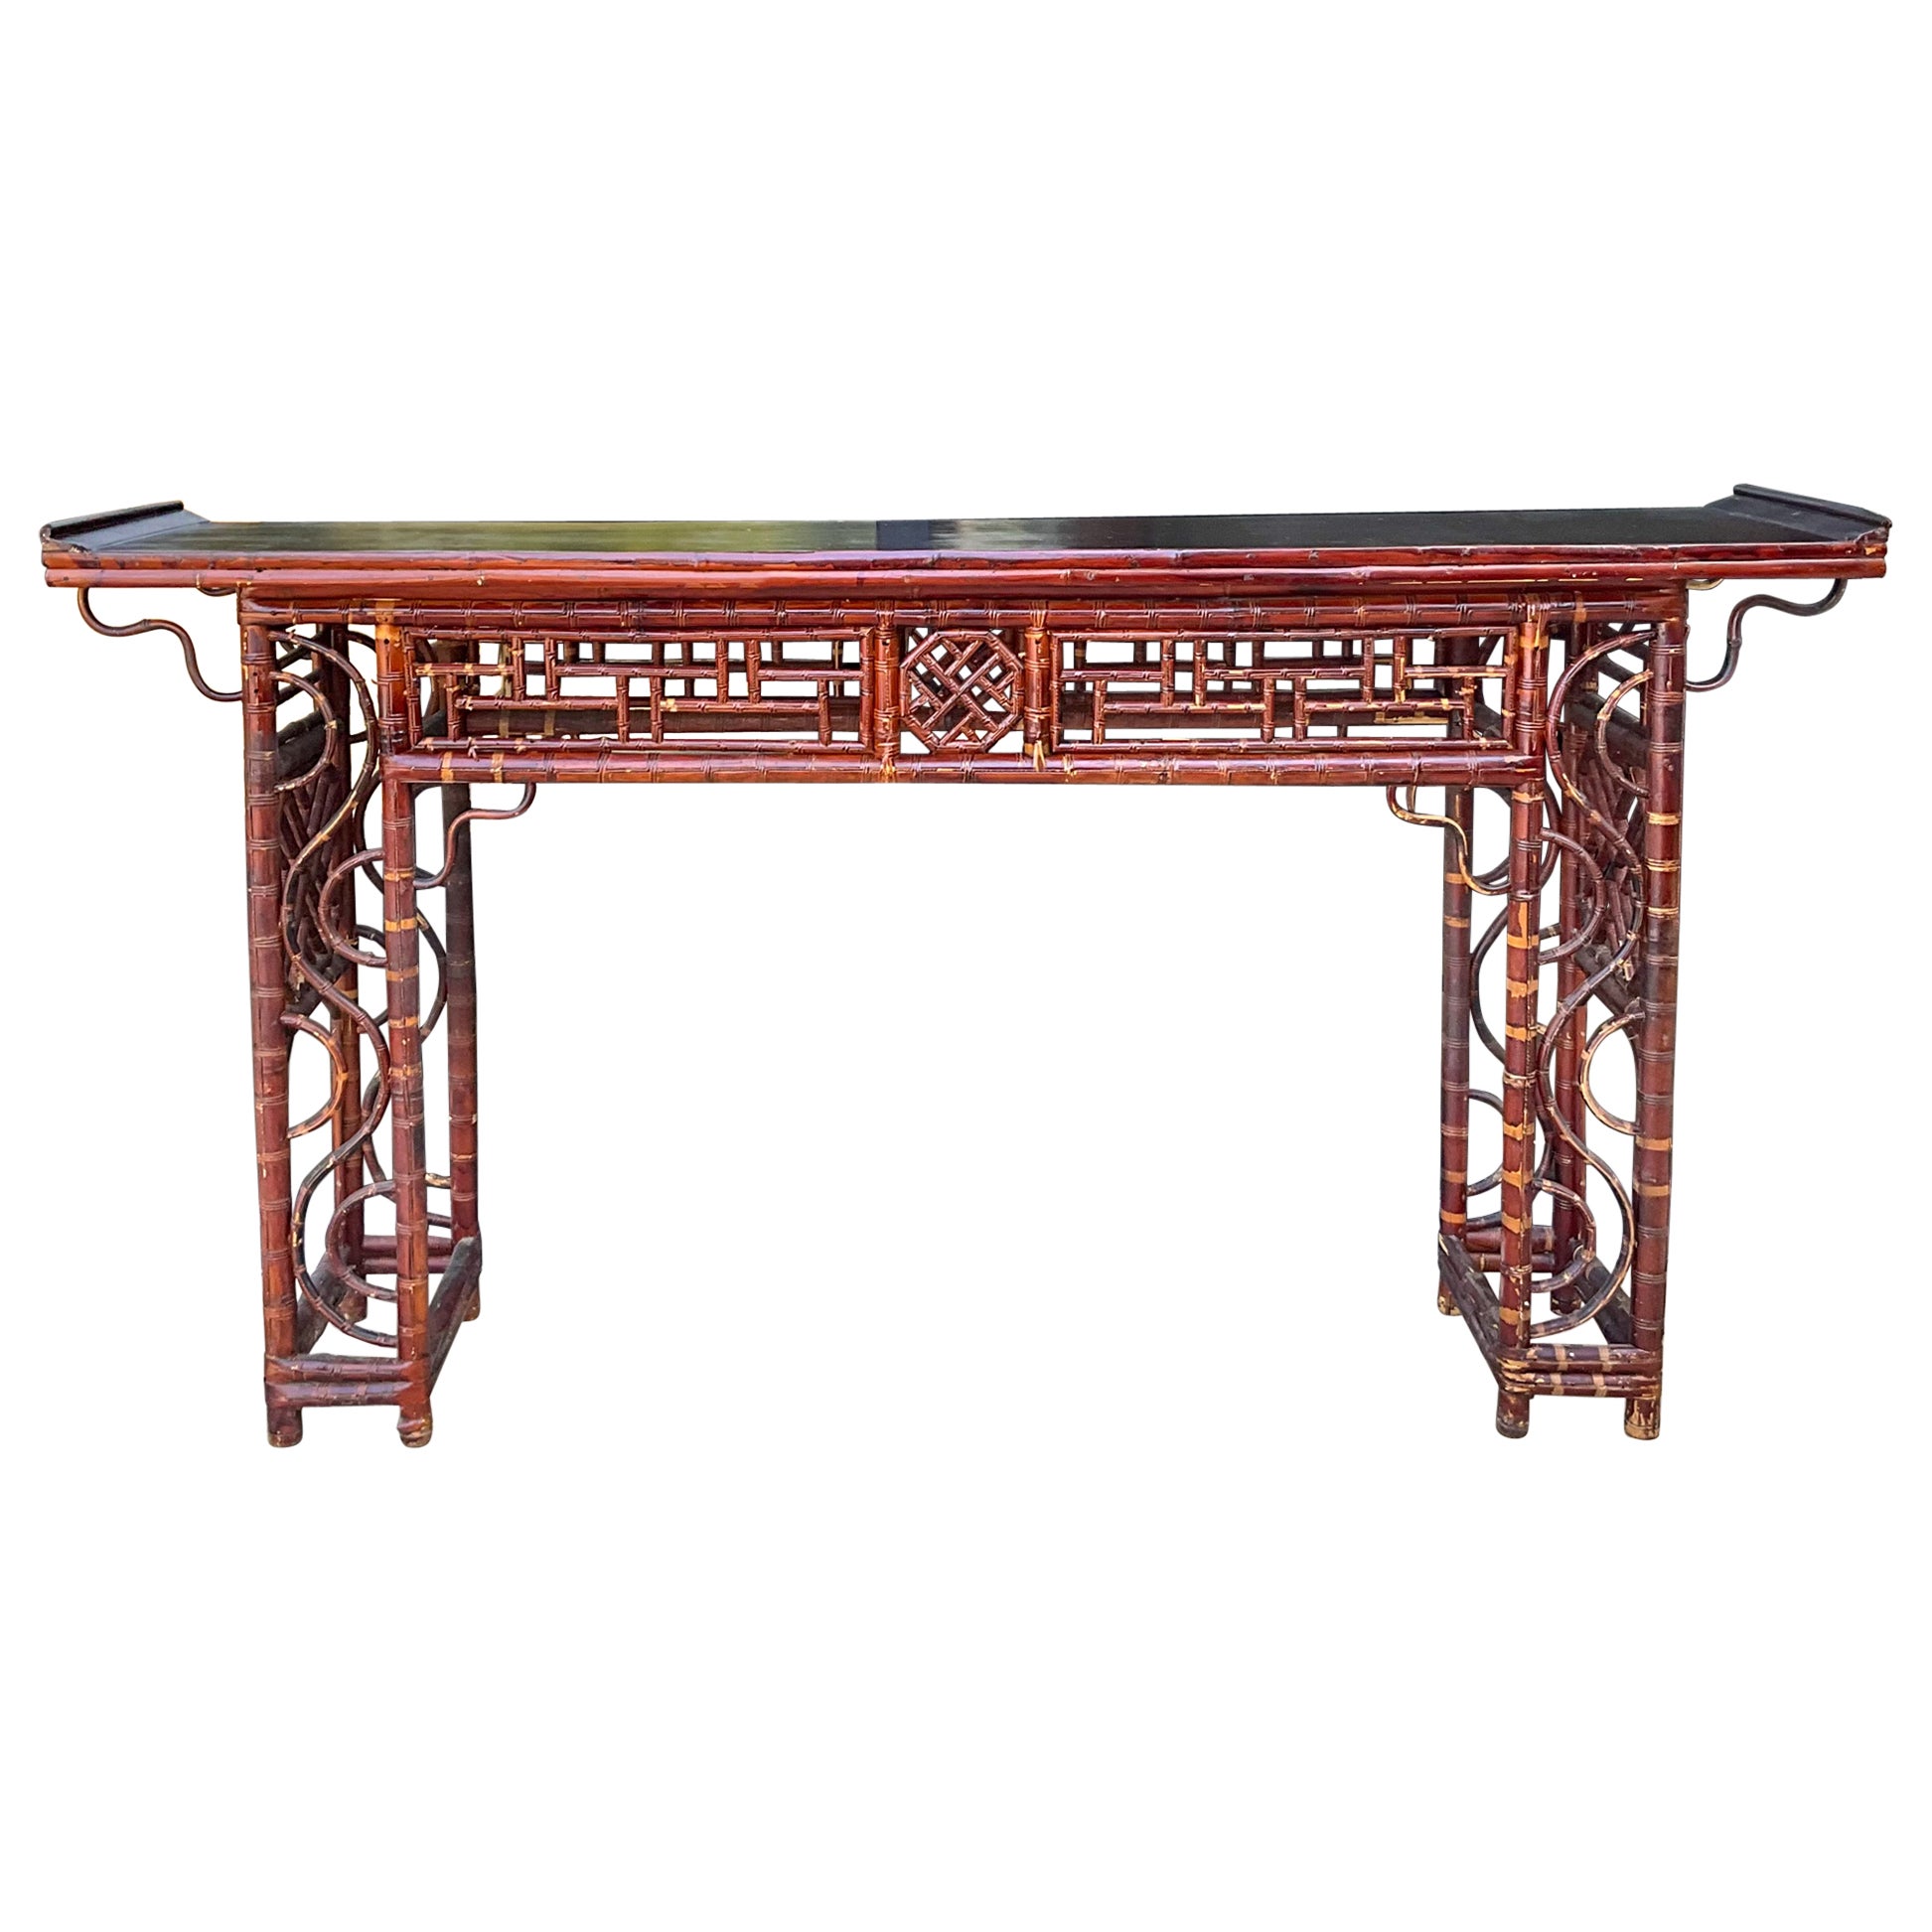 Antique Chinese Bamboo Altar Console Table With Chippendale Fretwork